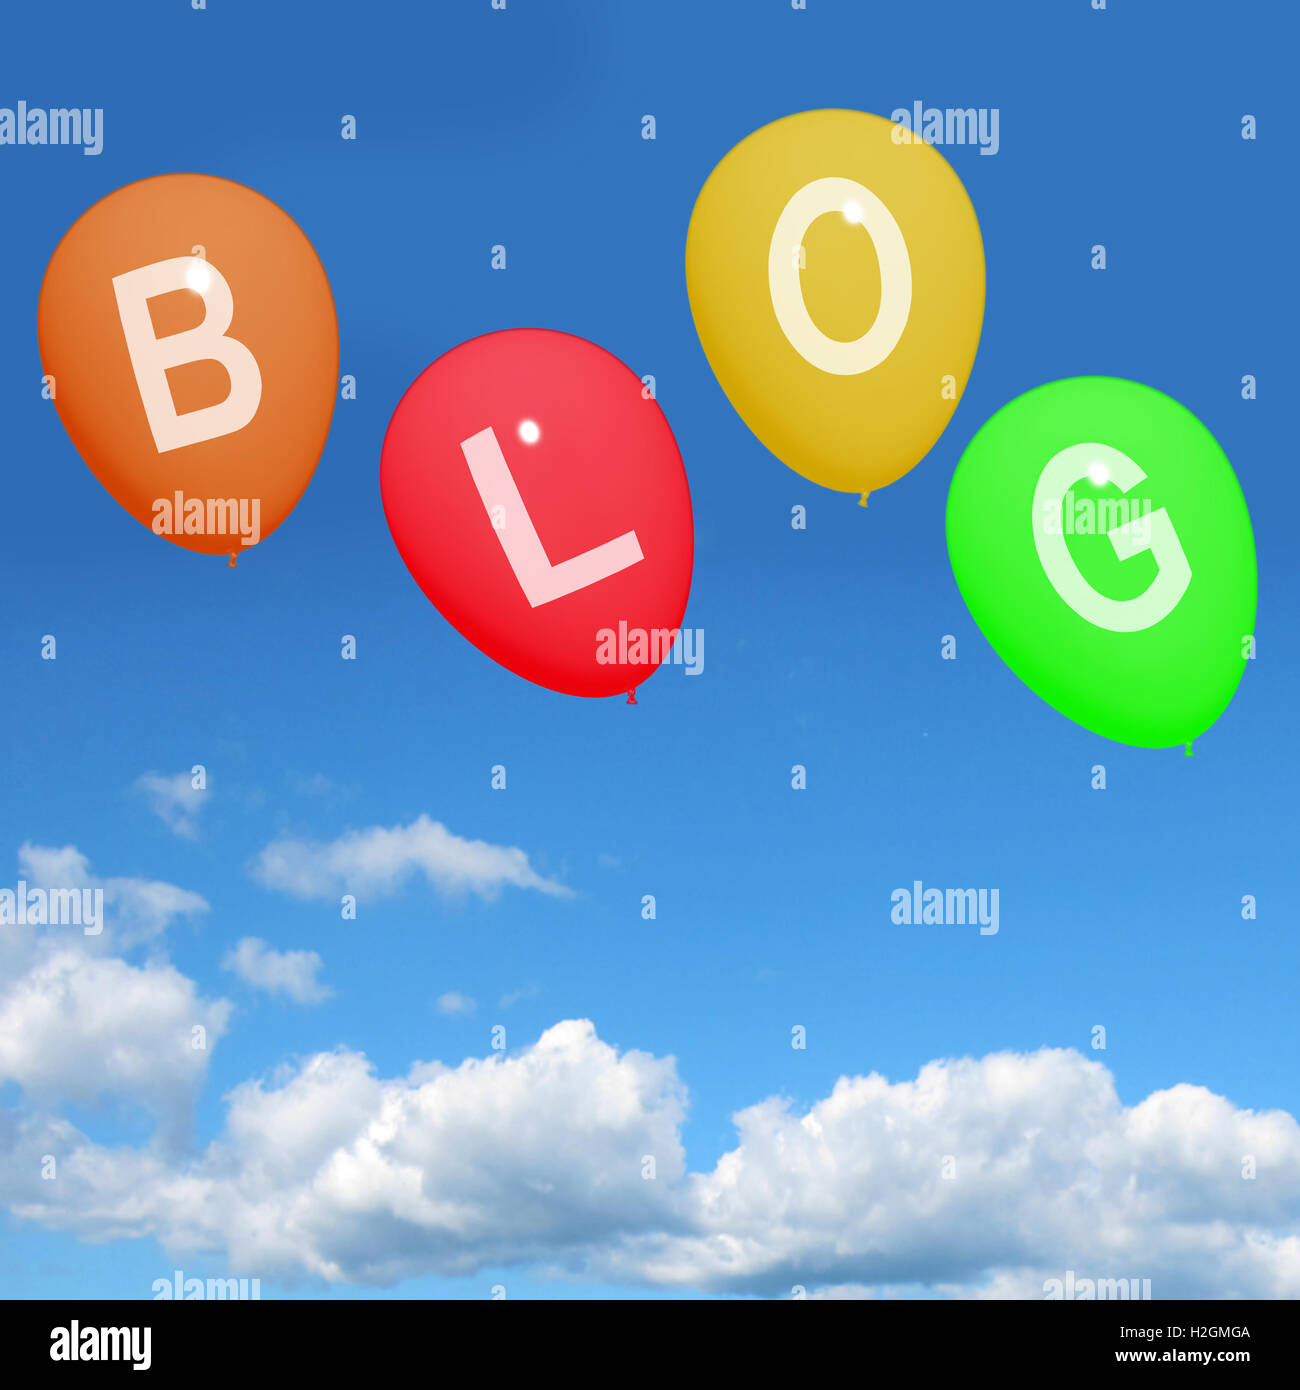 Four Blog Balloons Show Blogging and Bloggers Online Stock Photo